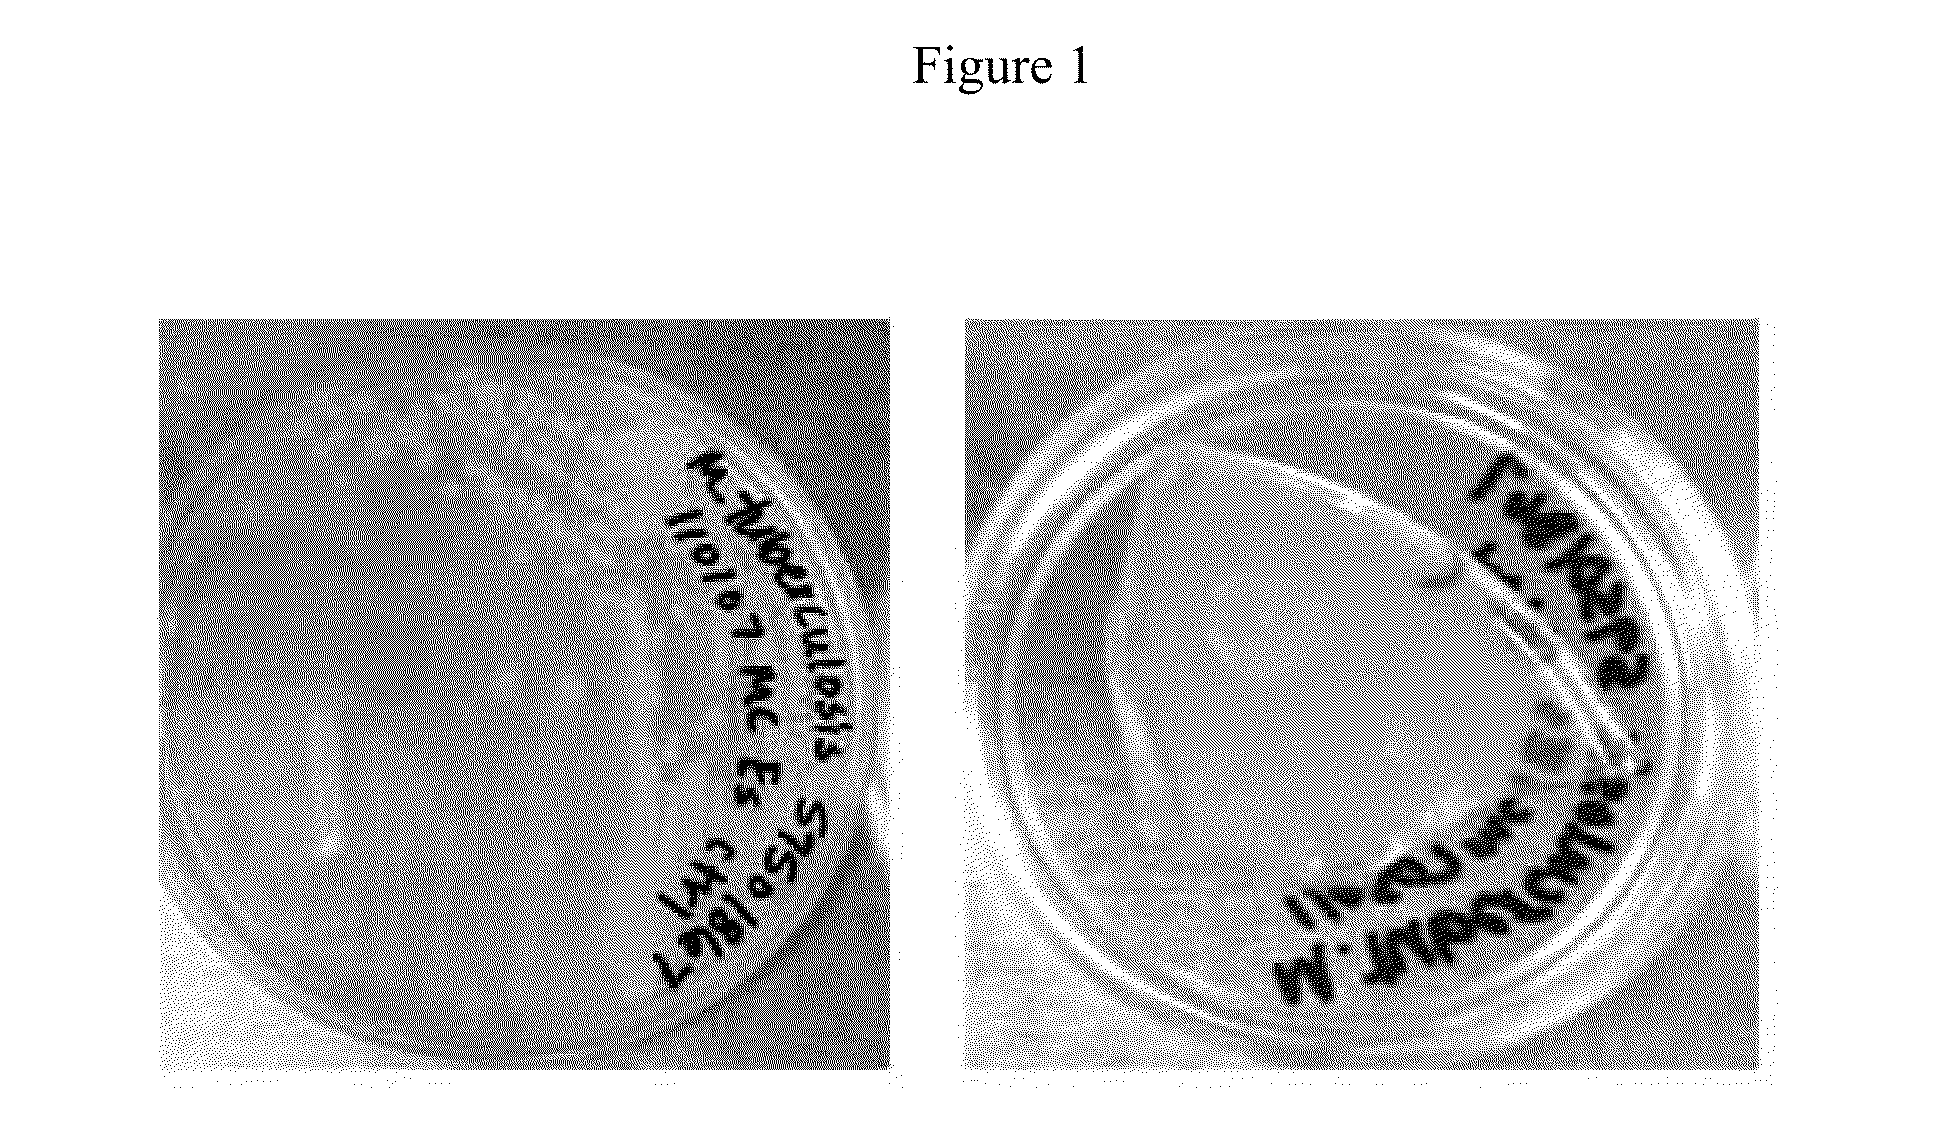 Antimicrobial Compositions and related methods of use